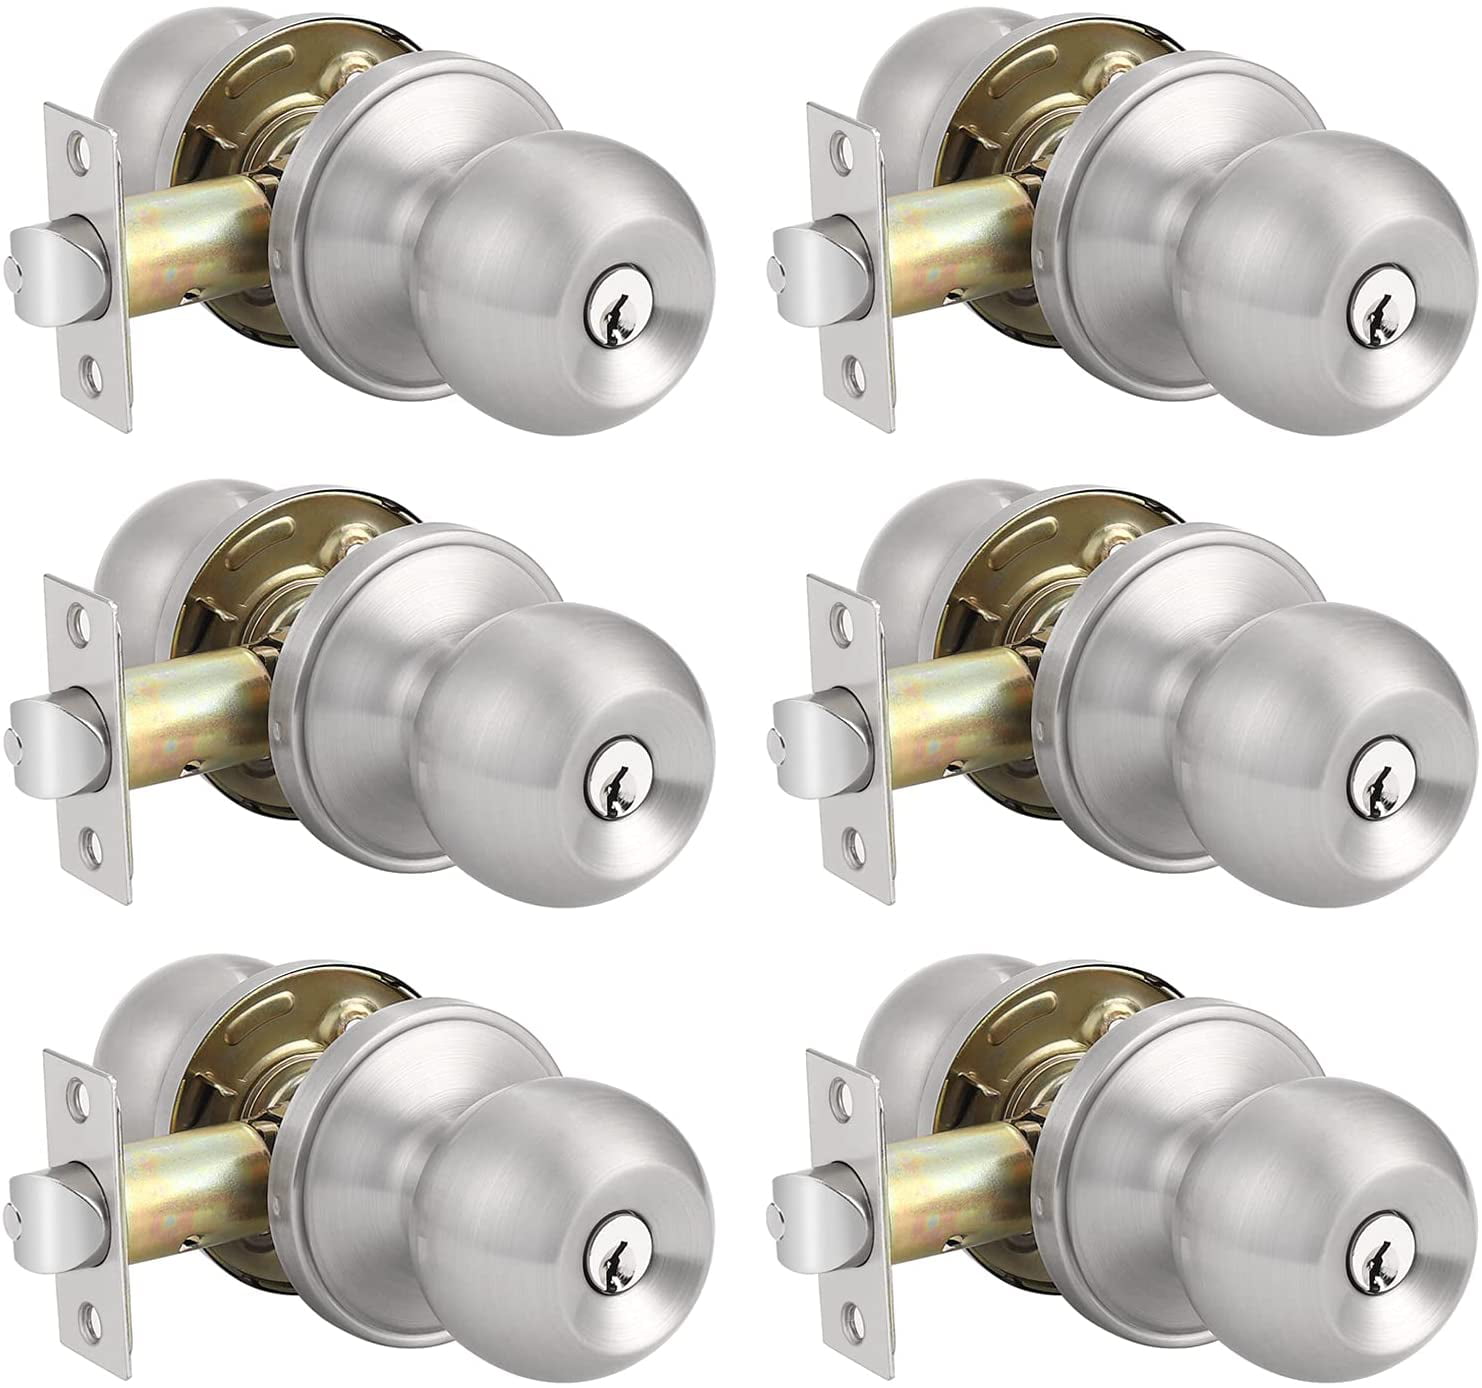 for Office or Front Door Lock with 3 Combo Keys Probrico（3 Pack）Entry Door Knob Keyed Alike,Satin Nickel Finish Door Lock Handle,Entry Door Lock/Ball Door knobs with Lock and Same Key,Entrance Knob 